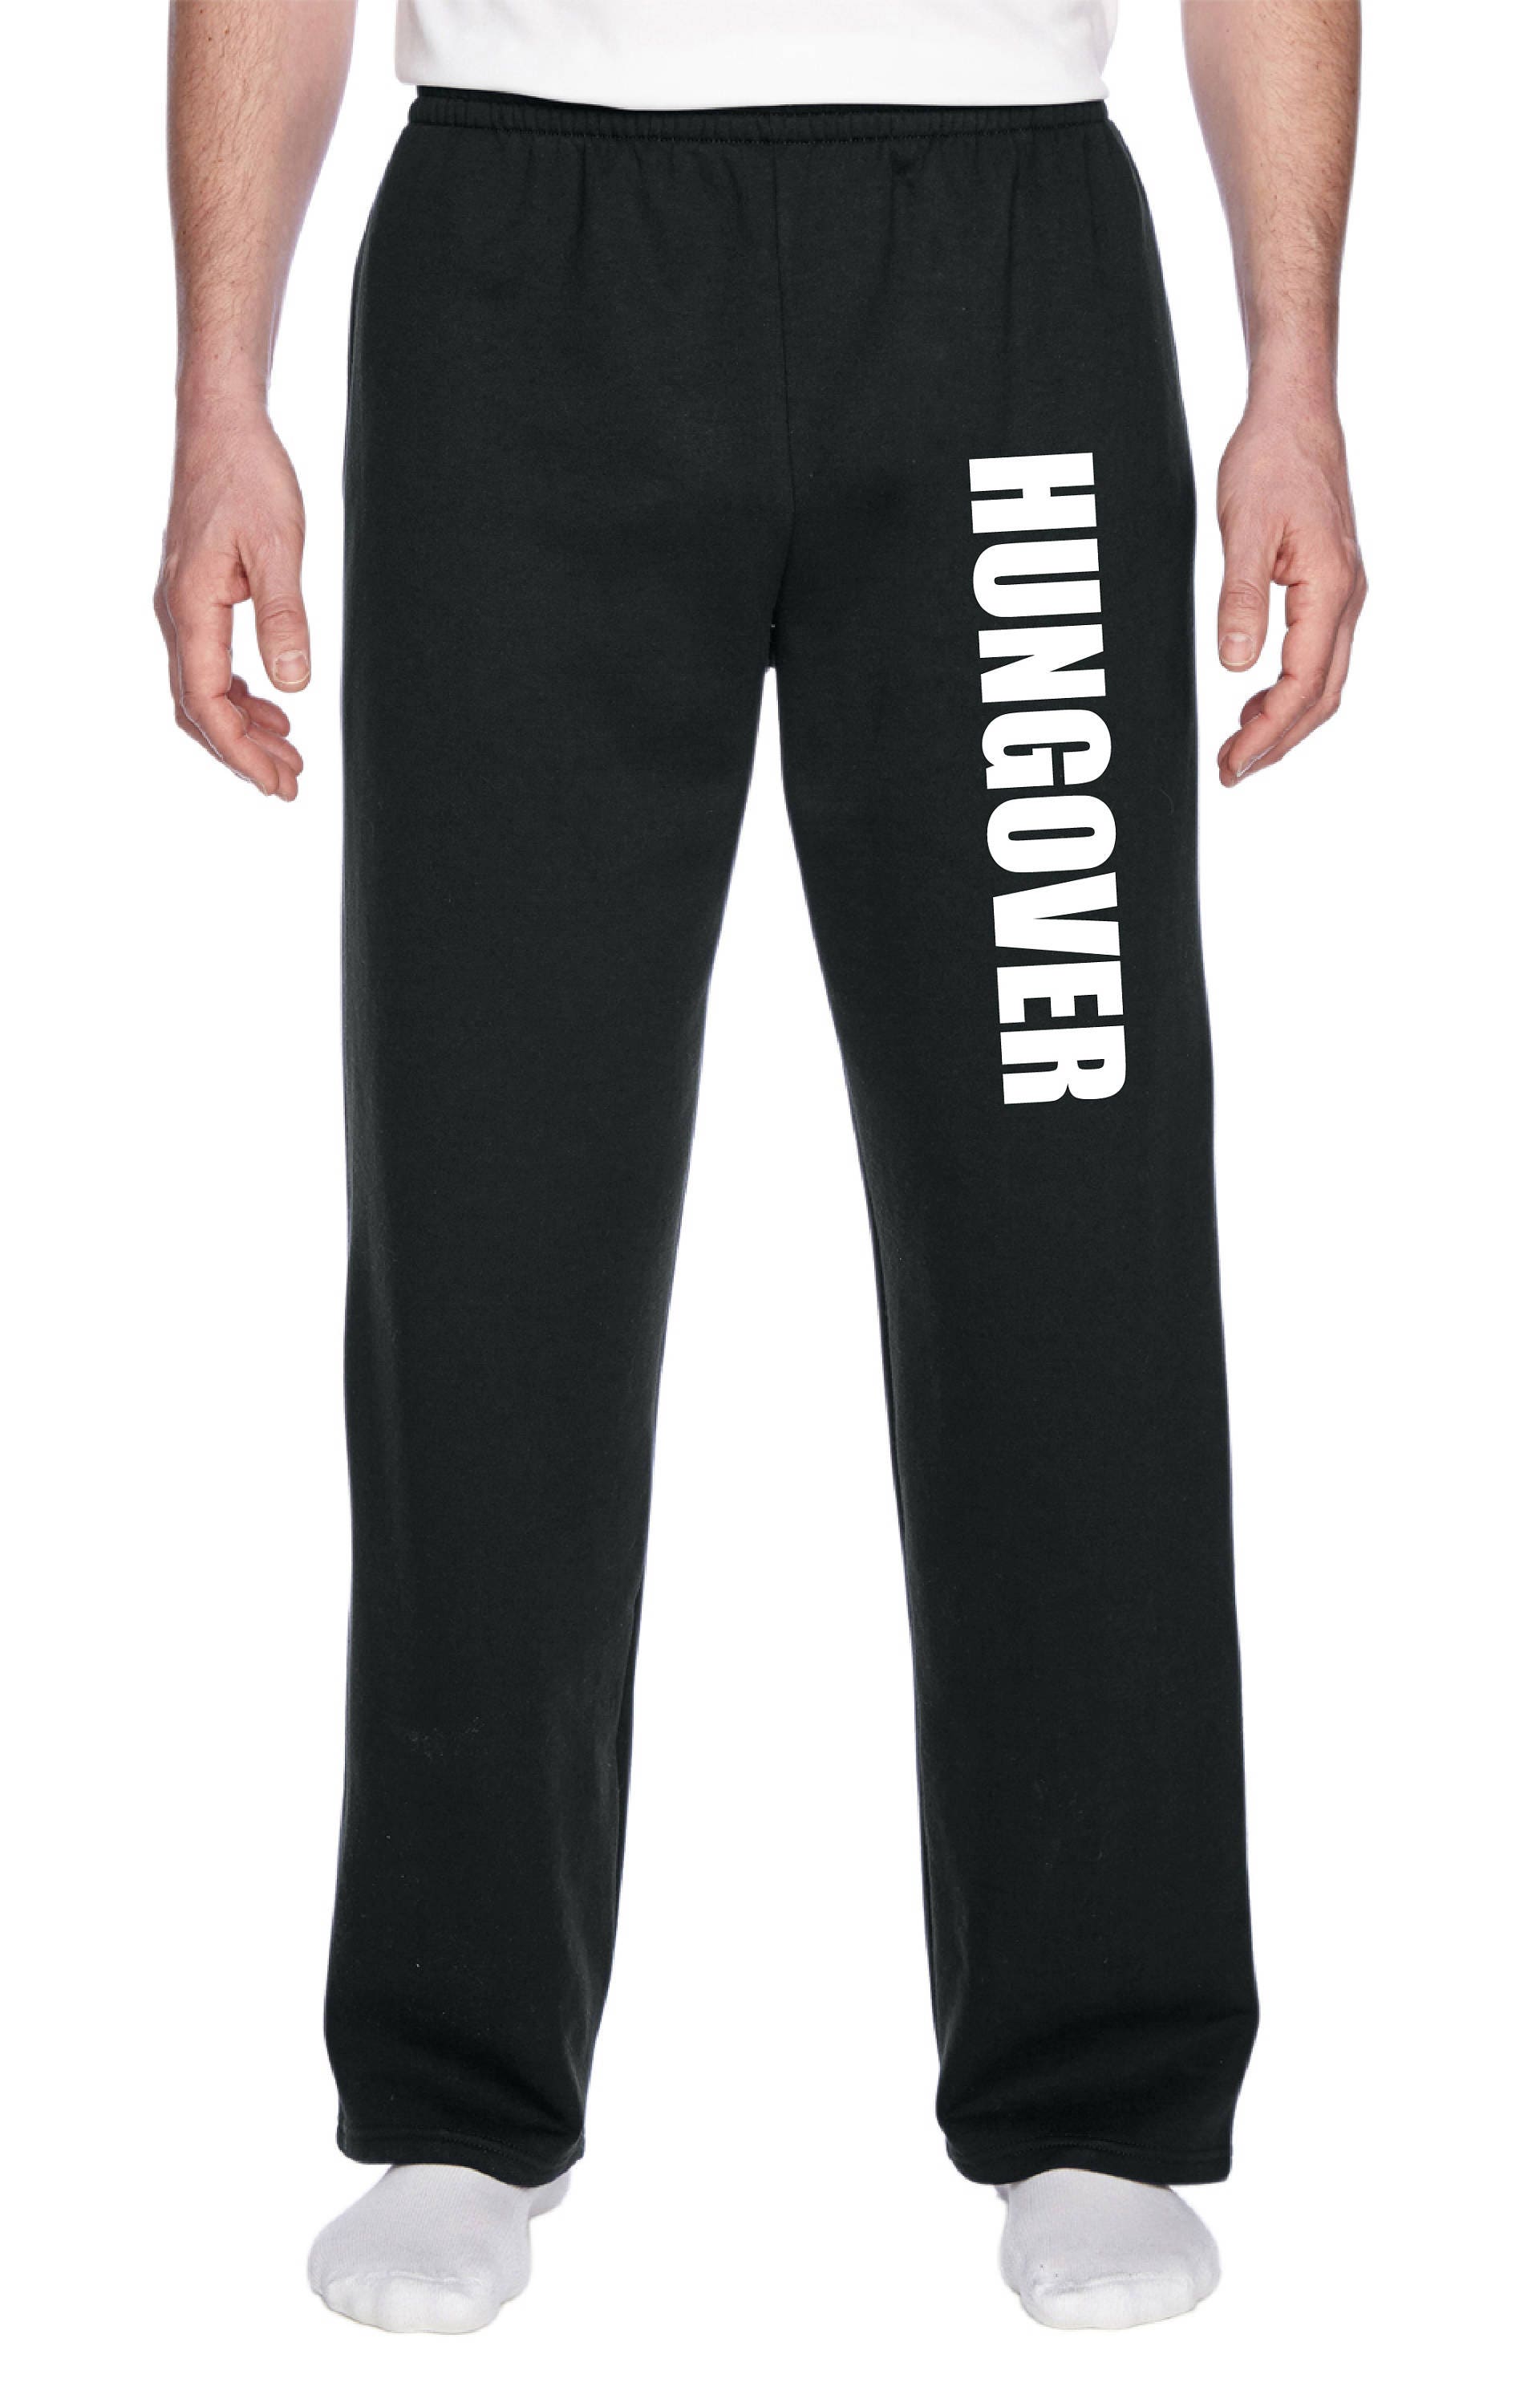 Hungover Sweats Hungover Sweatpants Hungover Pants Hungover - Etsy